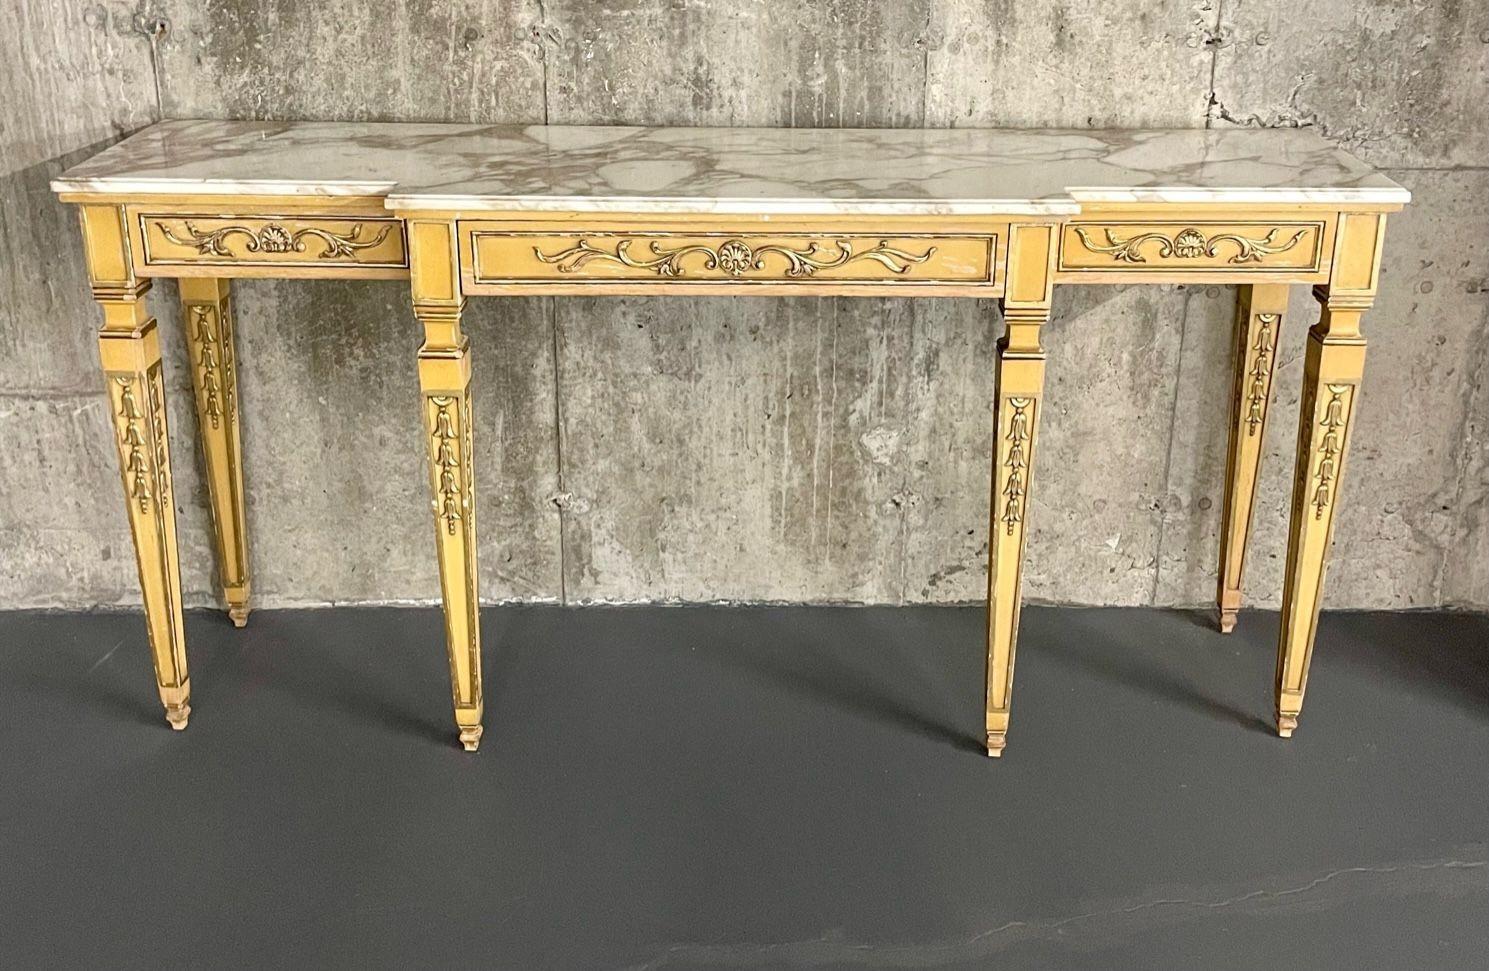 Hollywood Regency marble top console / sofa table, sideboard, giltwood, narrow.
A French Louis XVI Style Marble Top Console or Sofa Table have a parcel gilt and paint decorated finish supporting a large white and deep gray veined marble top. This